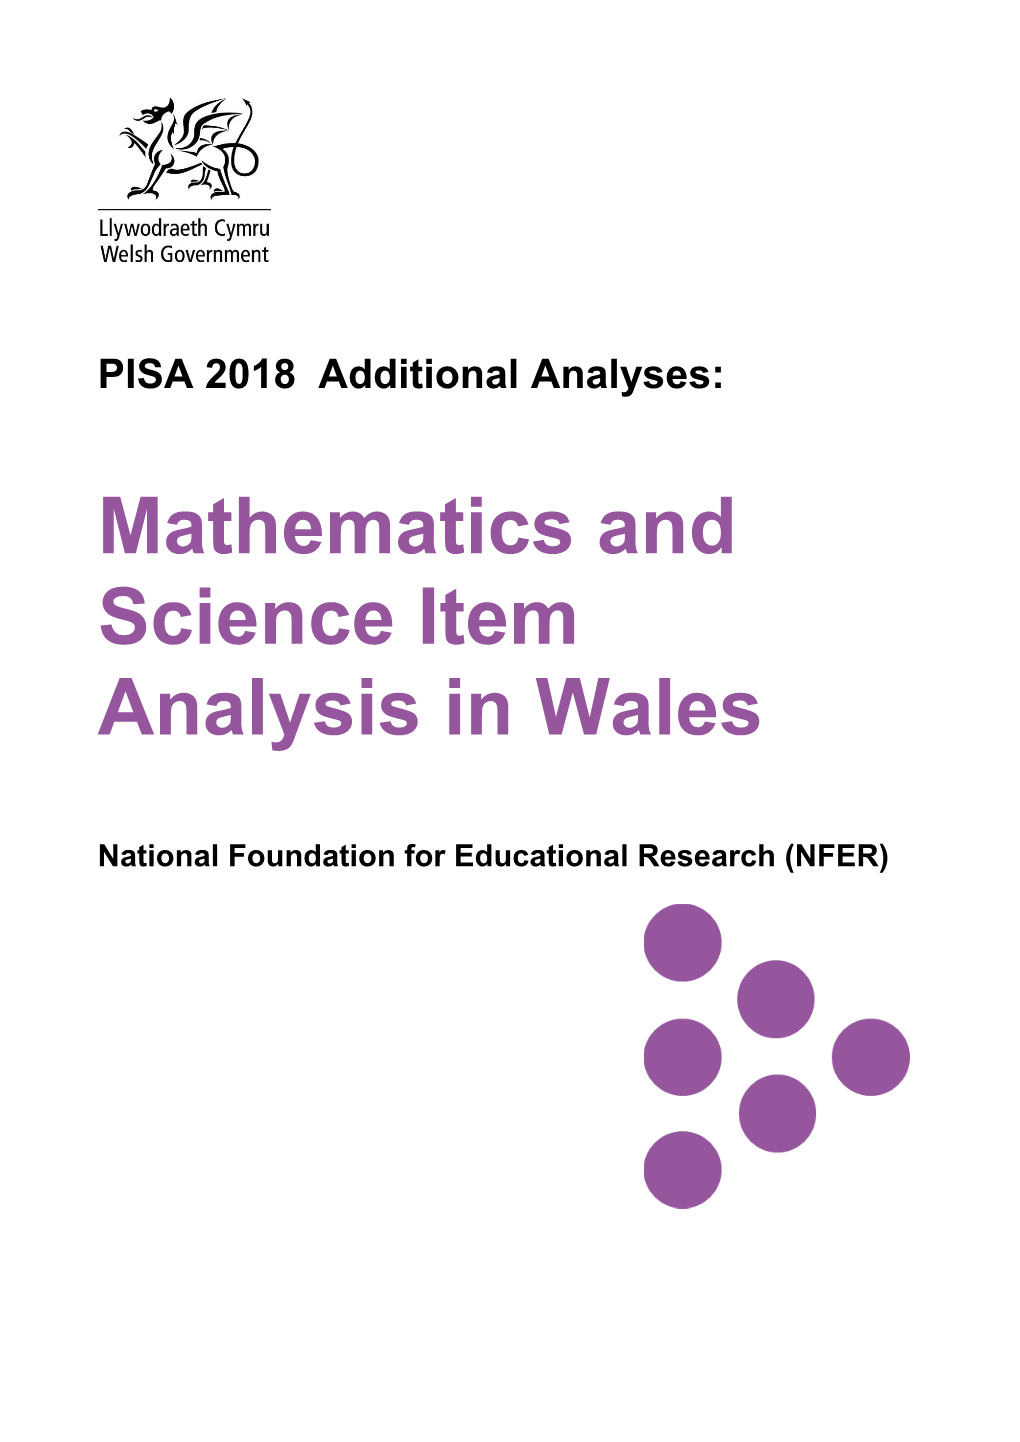 Mathematics and Science Item Analysis in Wales